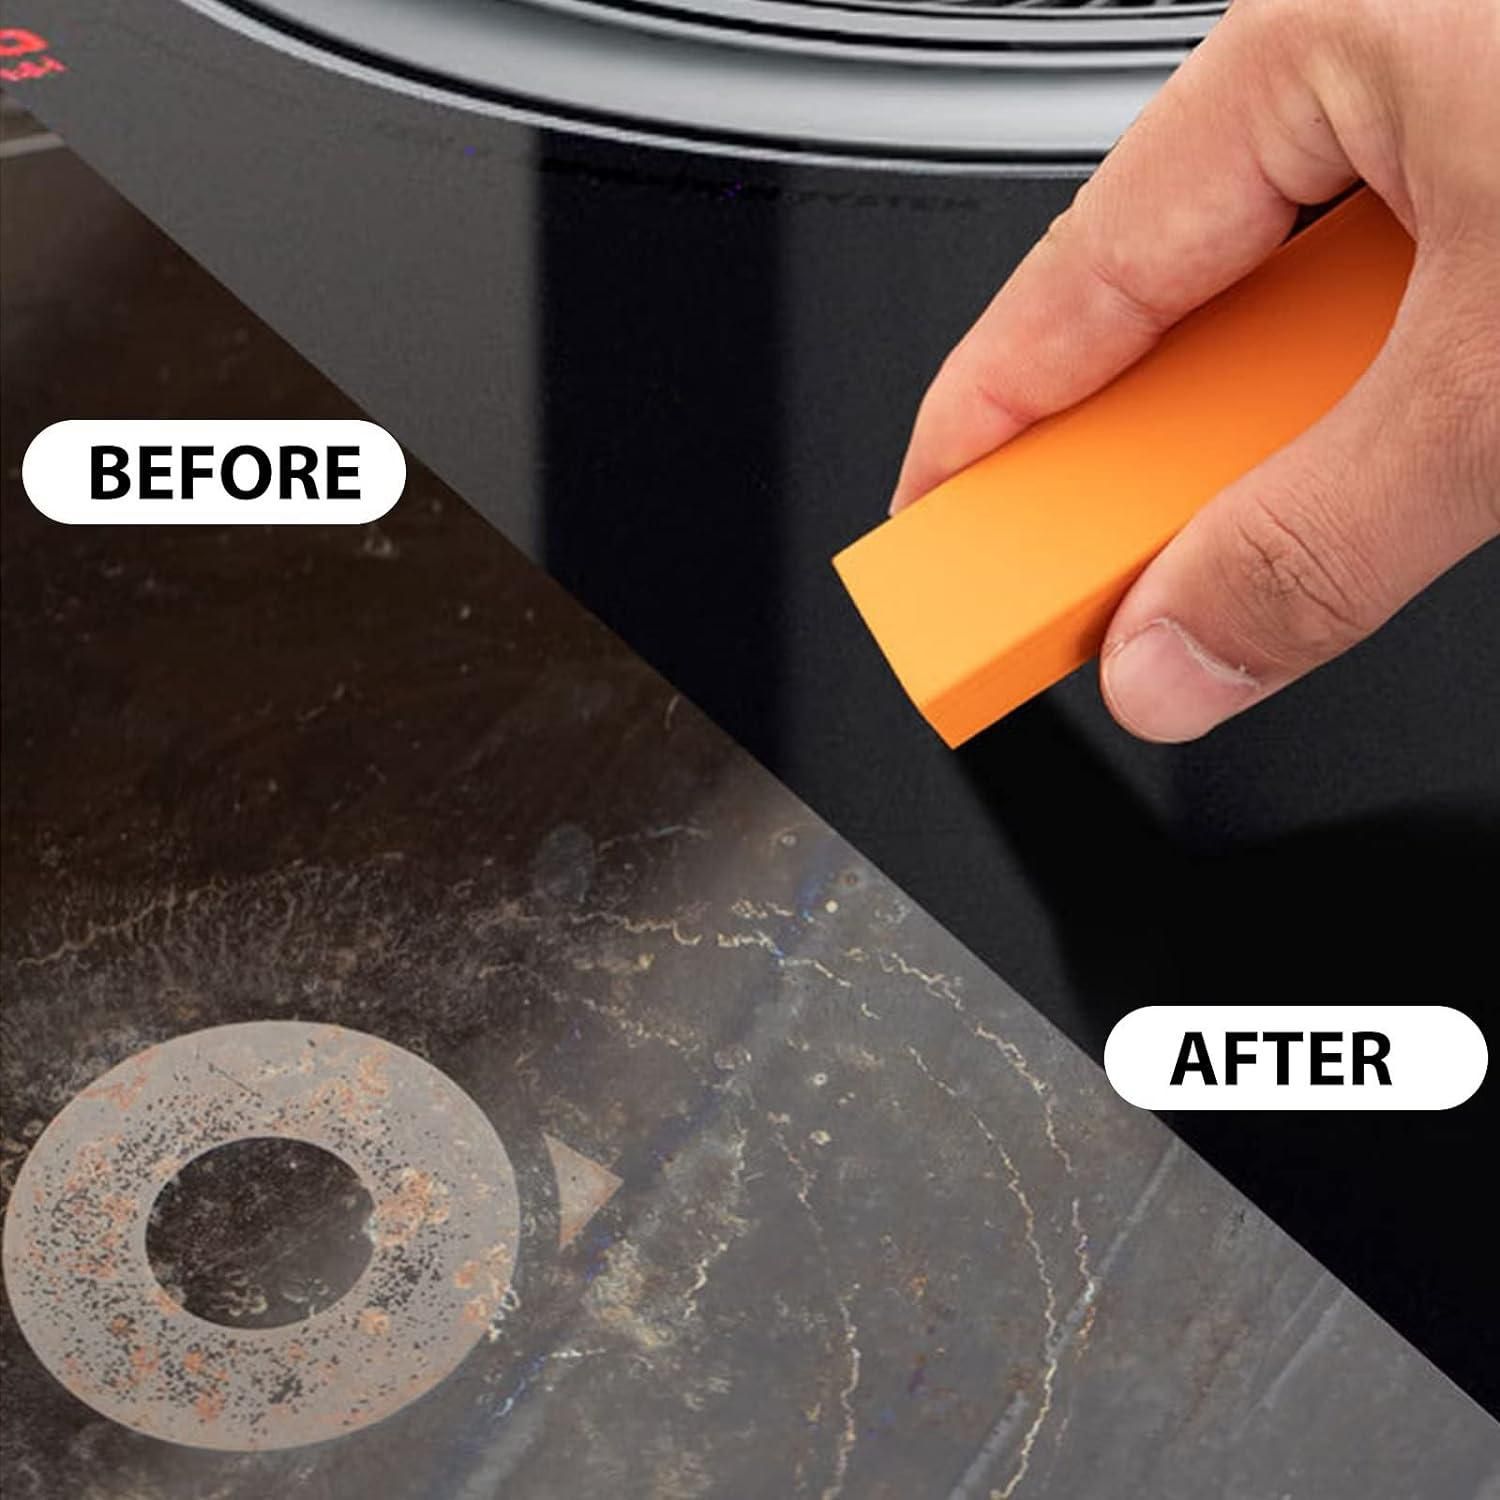 Rust Cleaning Easy Limescale Eraser Artifact, Stainless Steel Stains Eraser Decontamination Cleaner Eraser Rust Remover for Kitchen Home